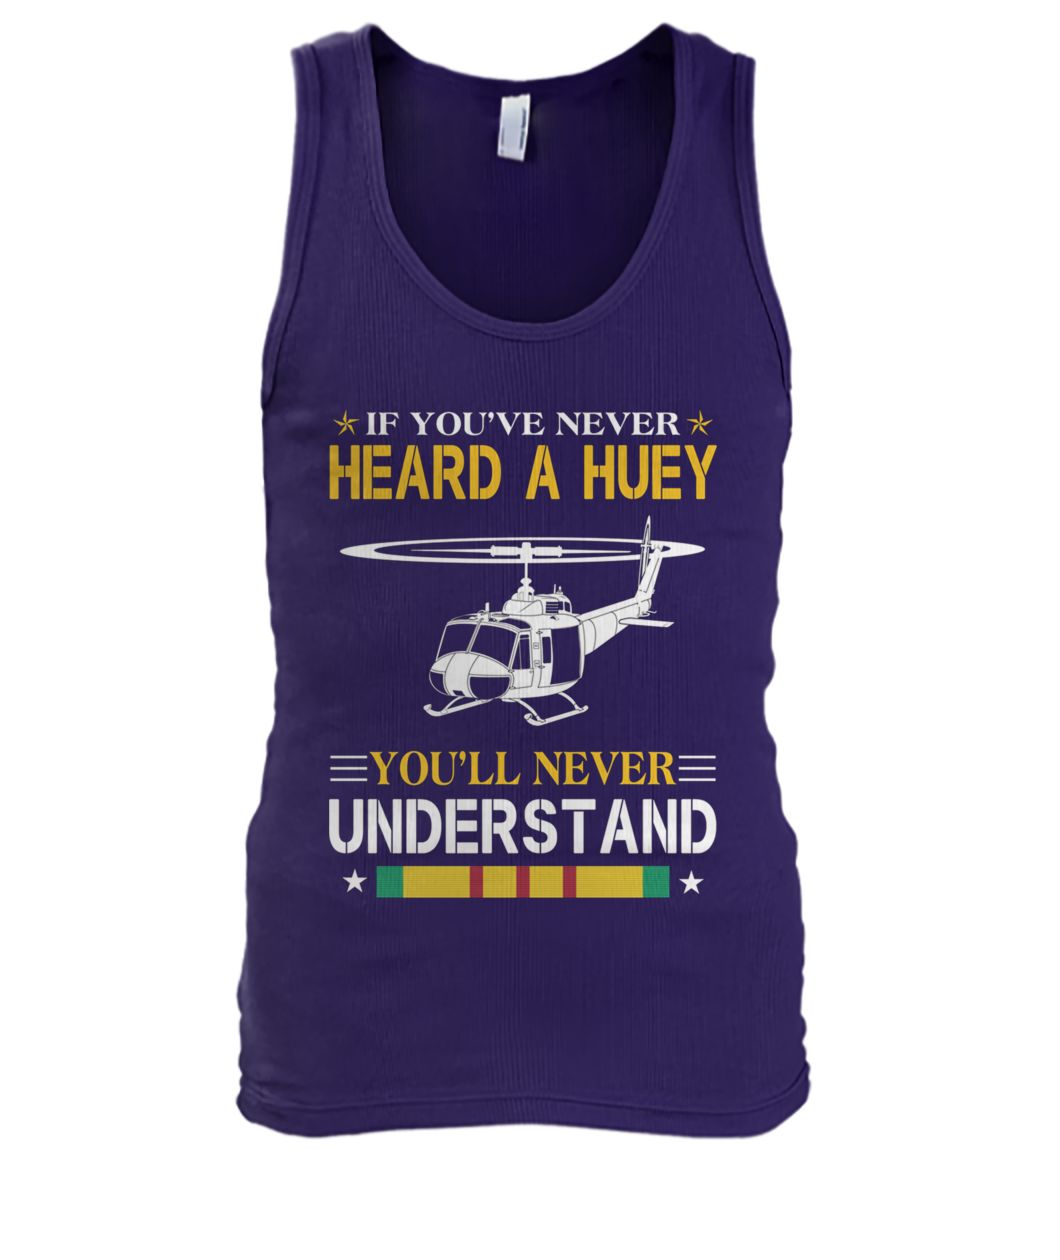 Air force if you've never heard a huey you'll never understand men's tank top